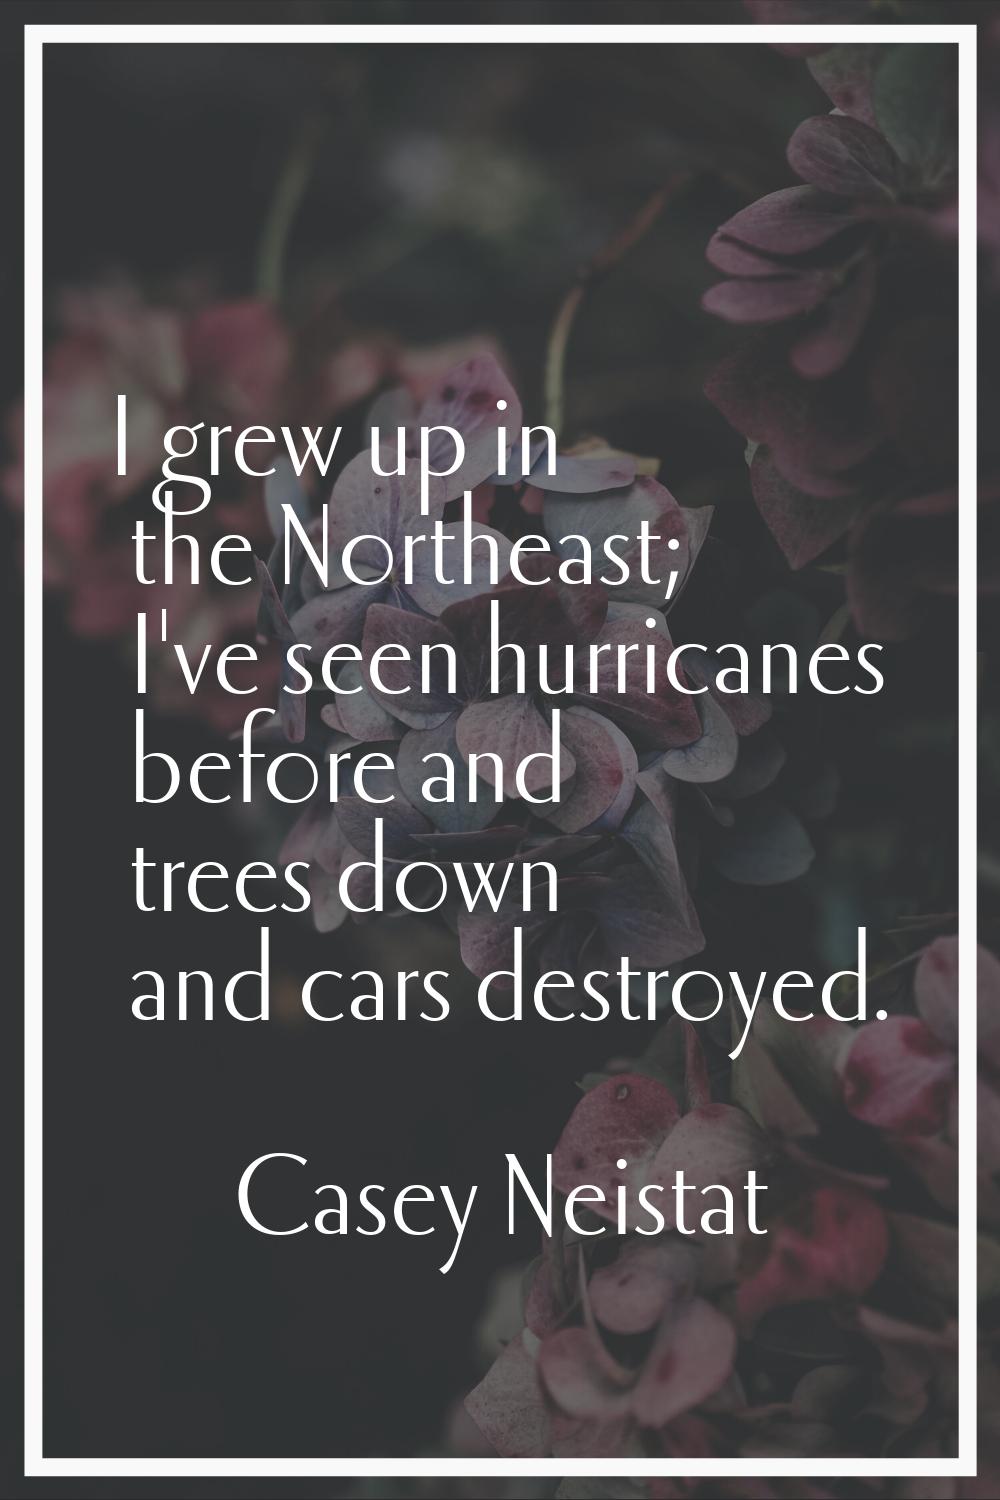 I grew up in the Northeast; I've seen hurricanes before and trees down and cars destroyed.